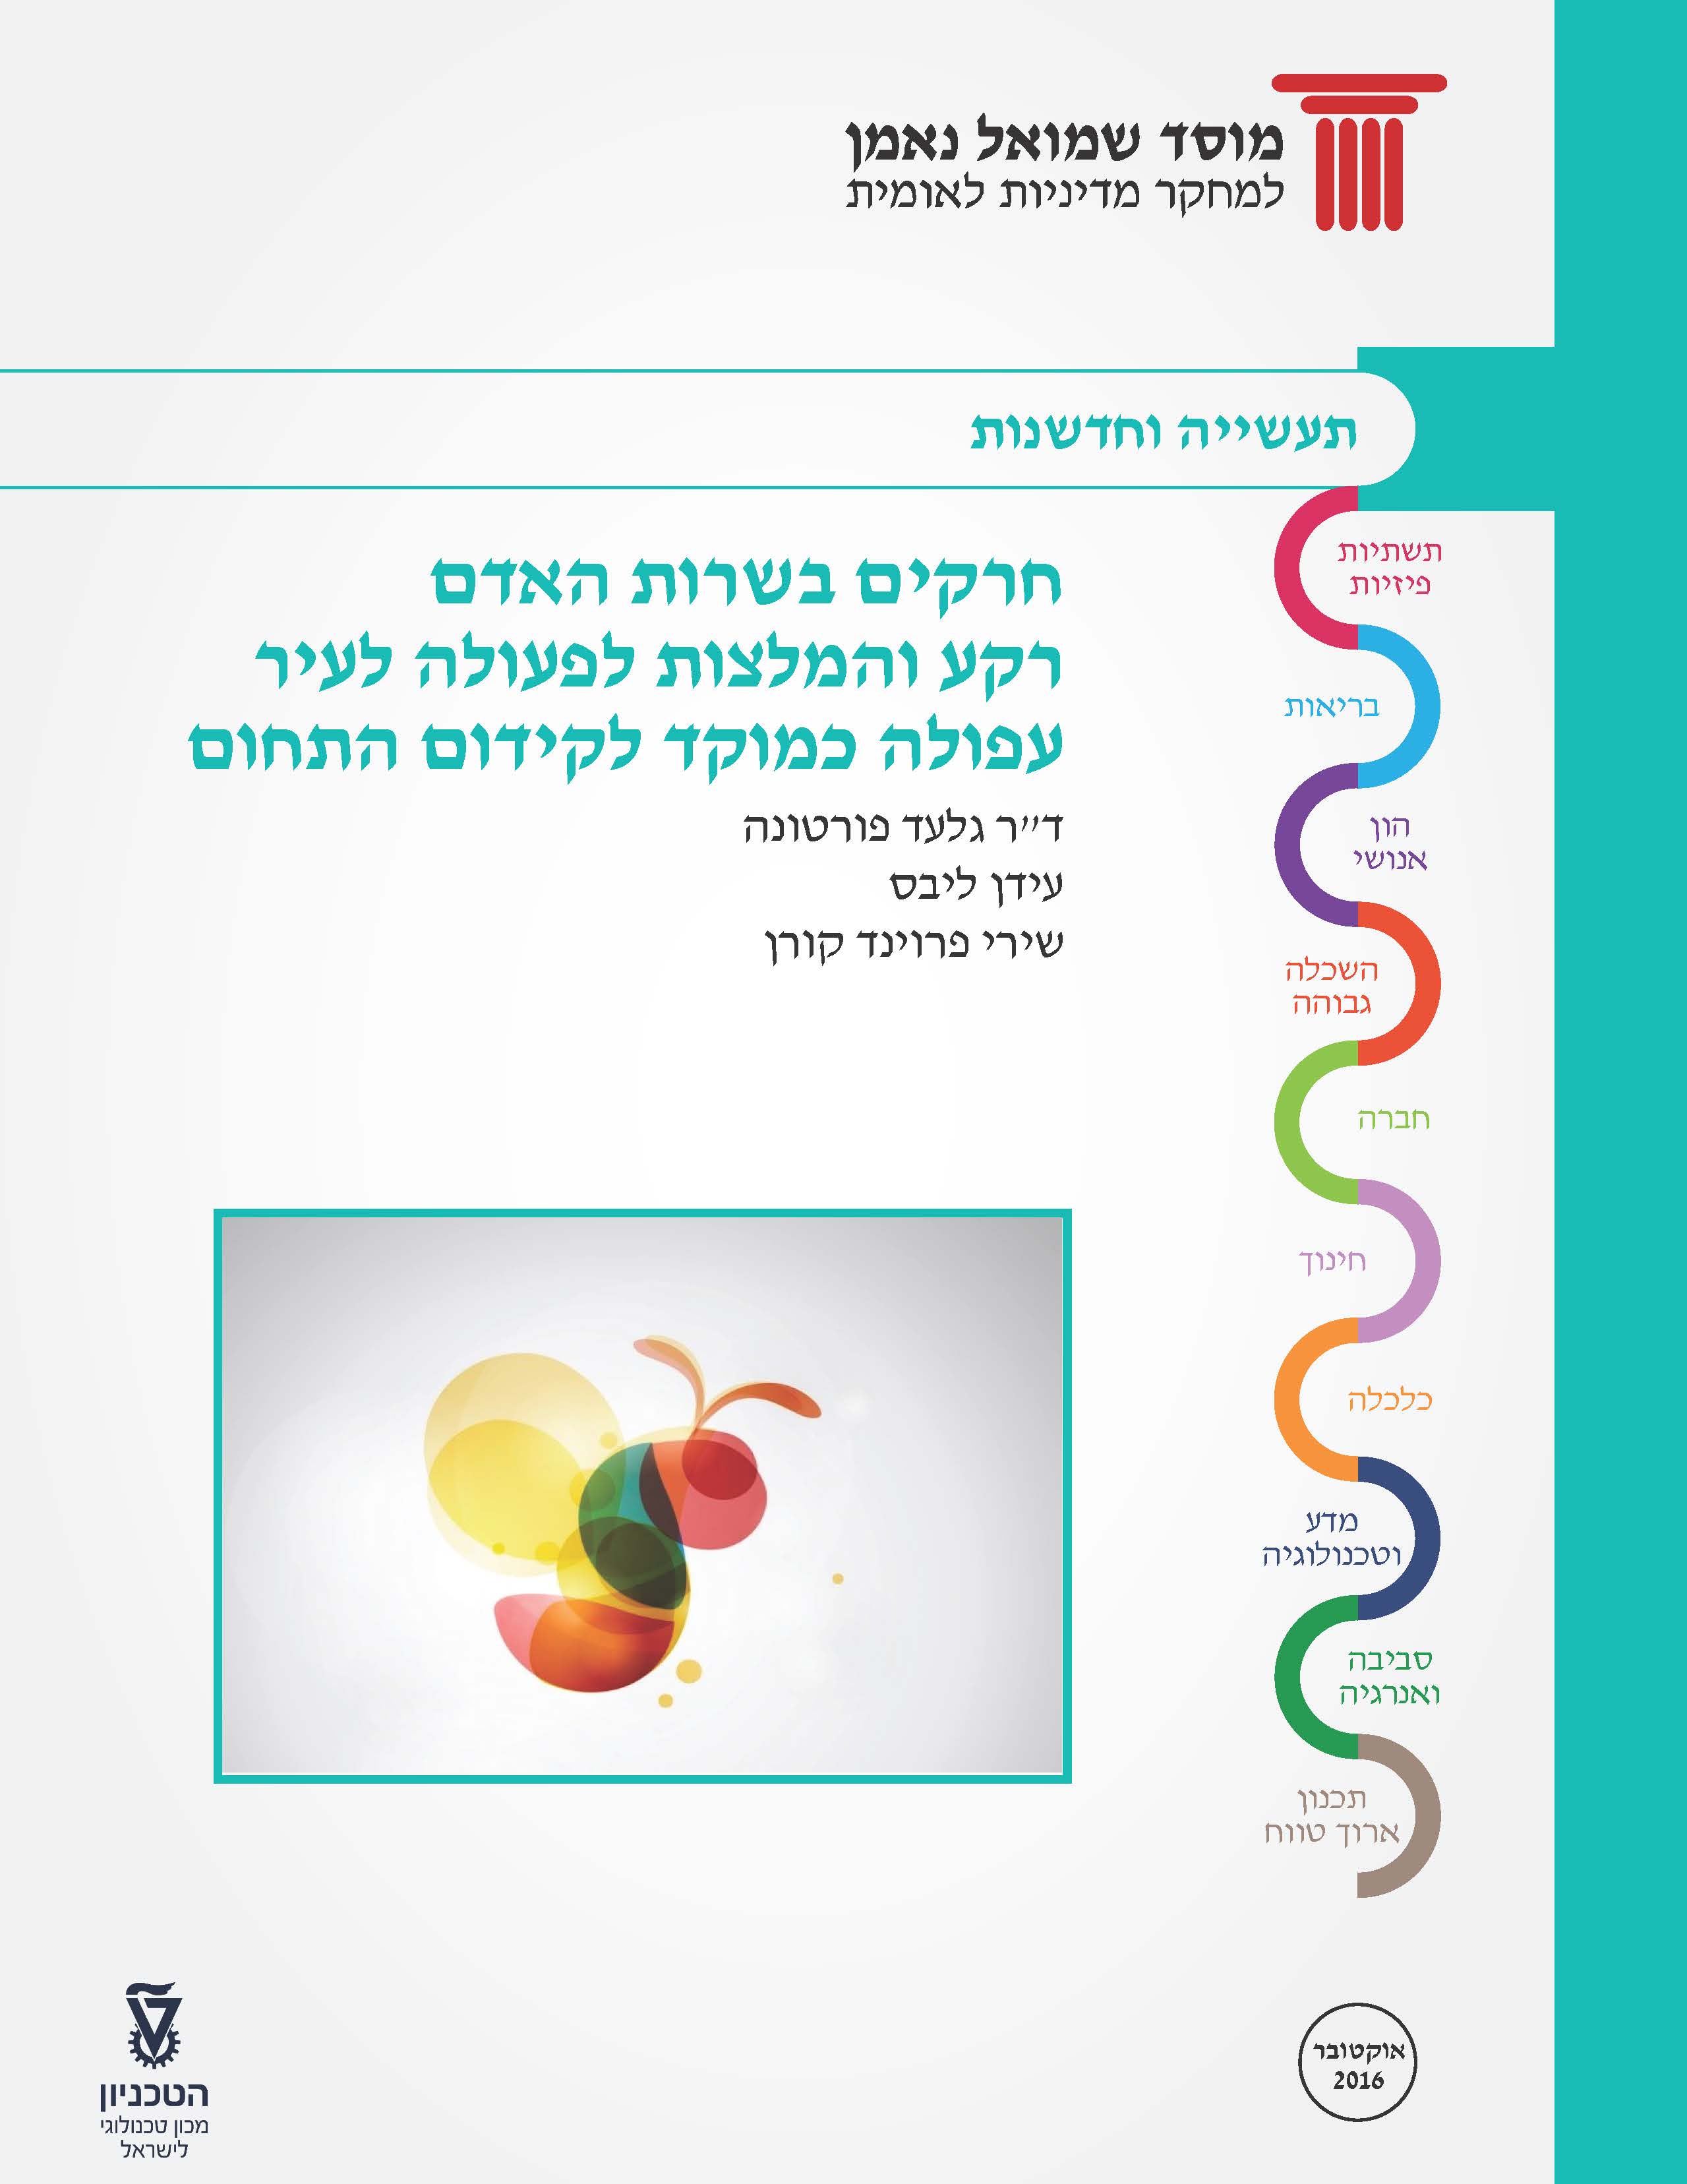 Insects in the Service of Man: Review and Recommendations for the City of Afula as a Hub to Promote the Field